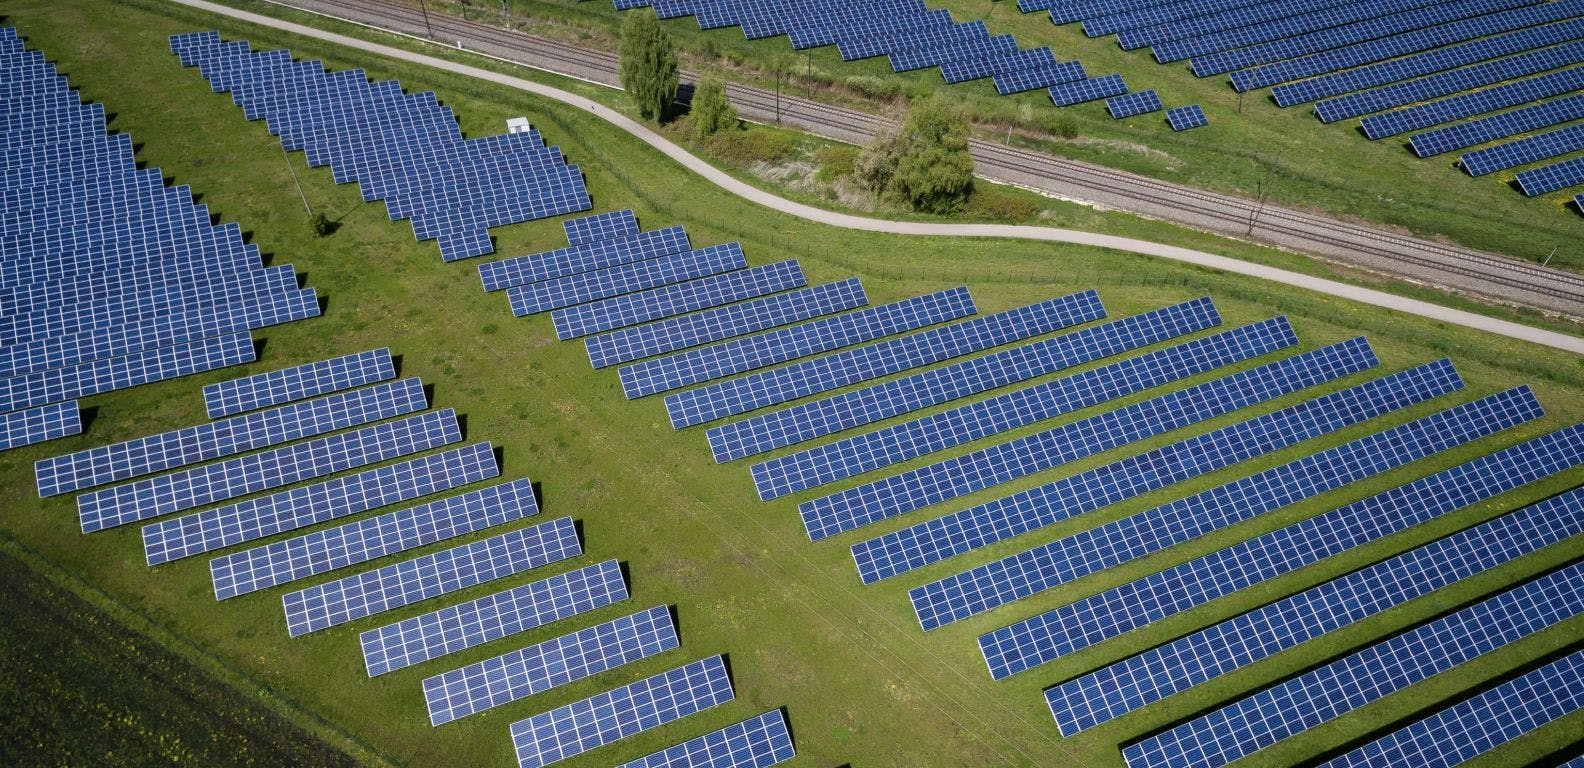 Overhead photo of solar panels in a field